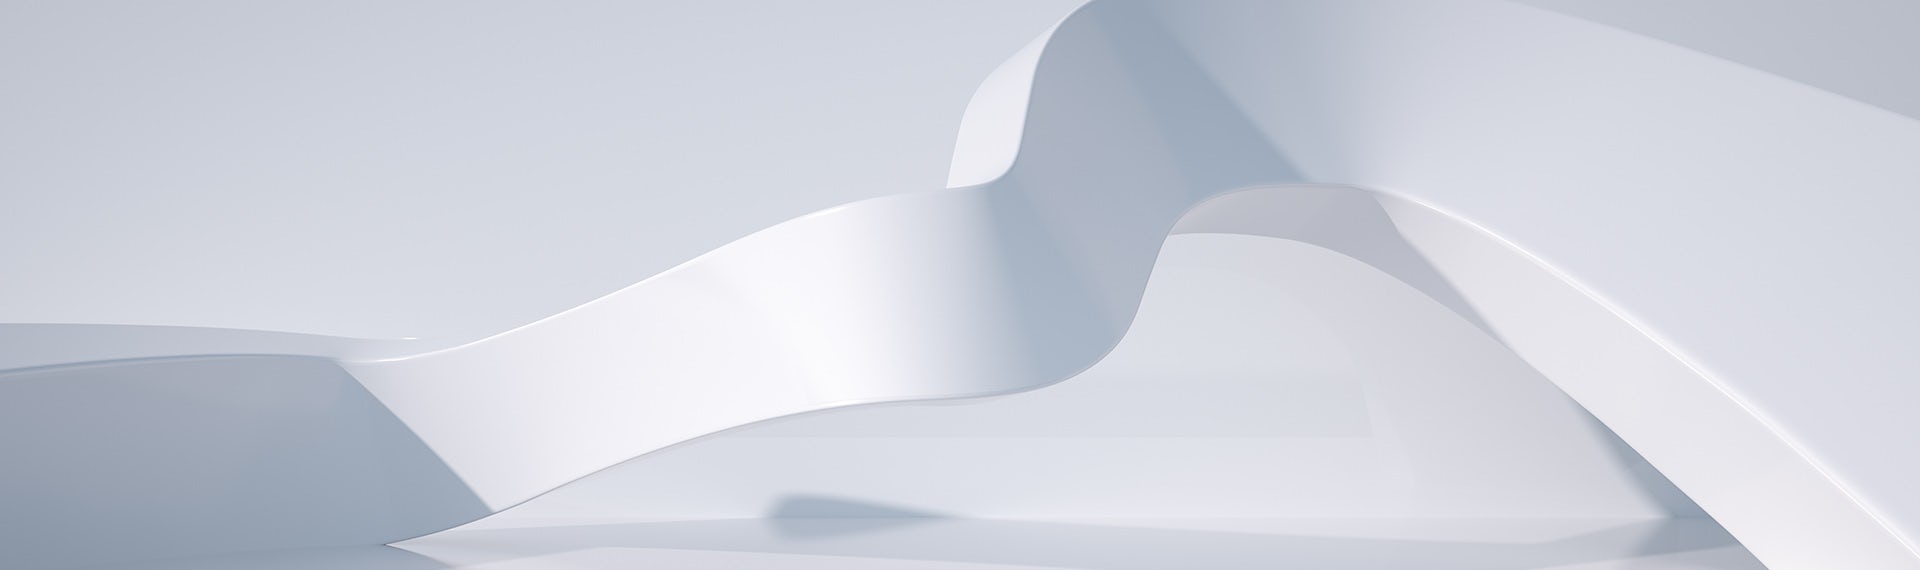 A 3d model of a white object on a white background.